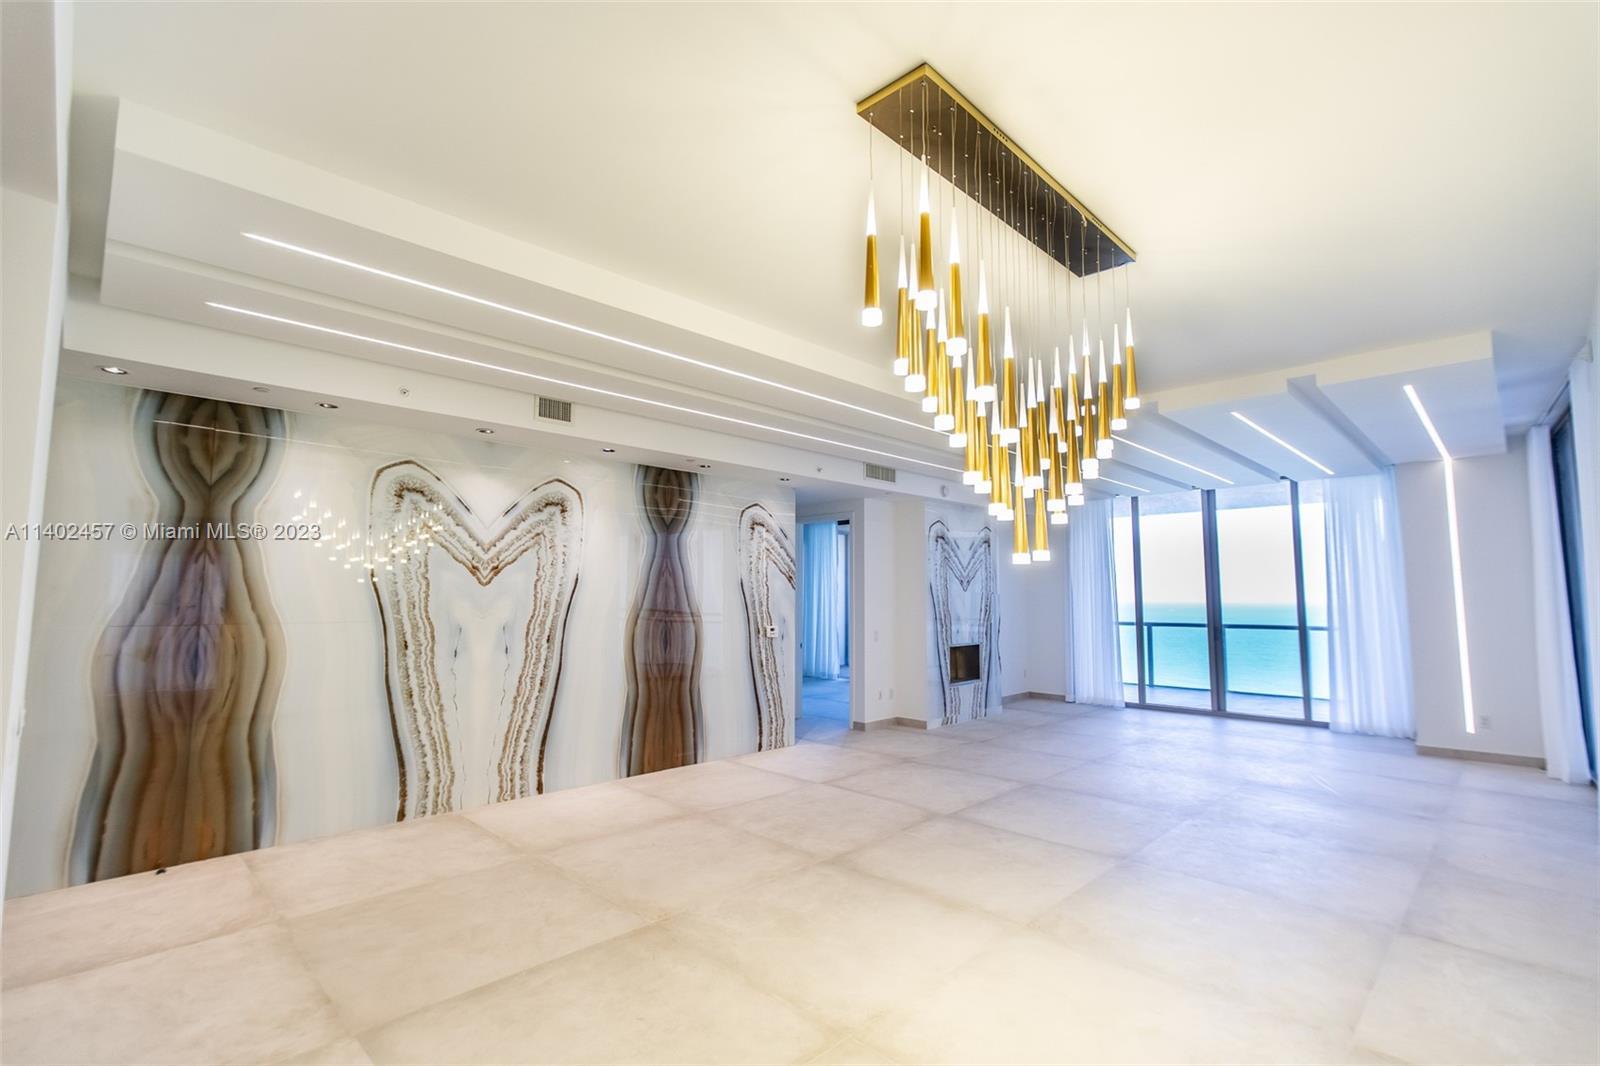 Welcome to your dream condo! St Regis, a 5 star resort. This stunning two-bedroom, two-and-a-half-ba